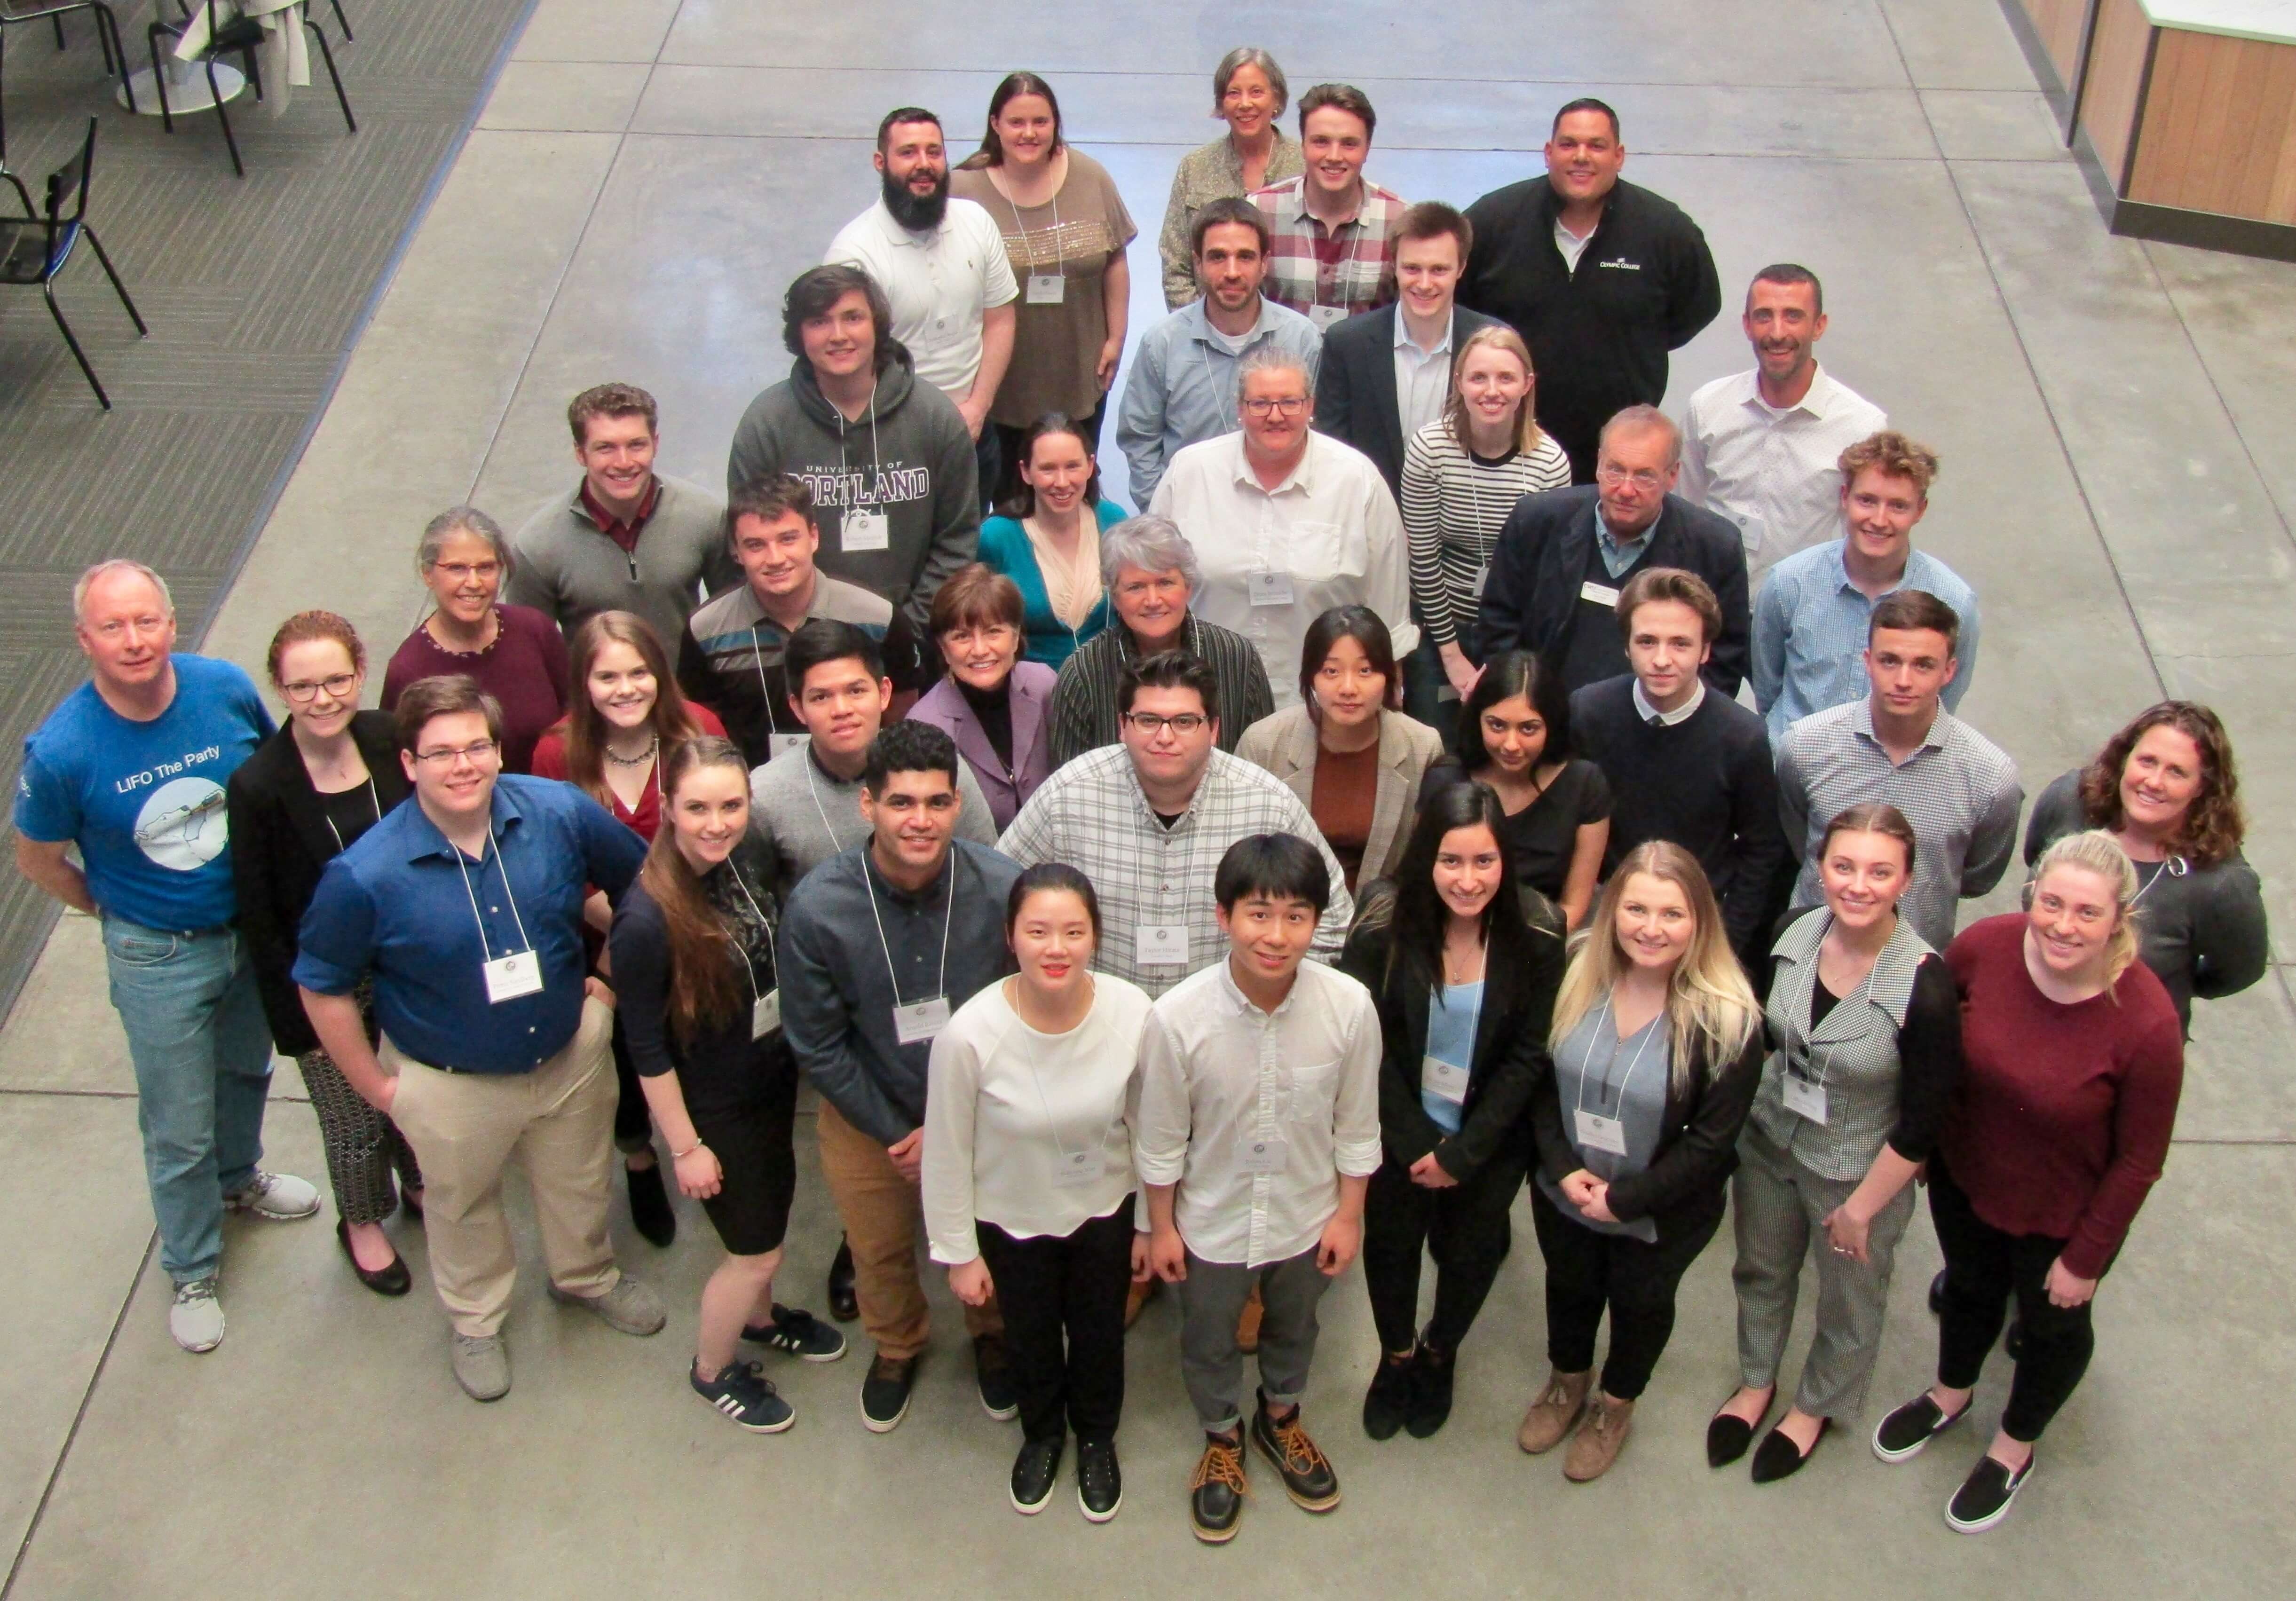 Group picture of all of the students and faculty advisors that participated in the Case Competition.